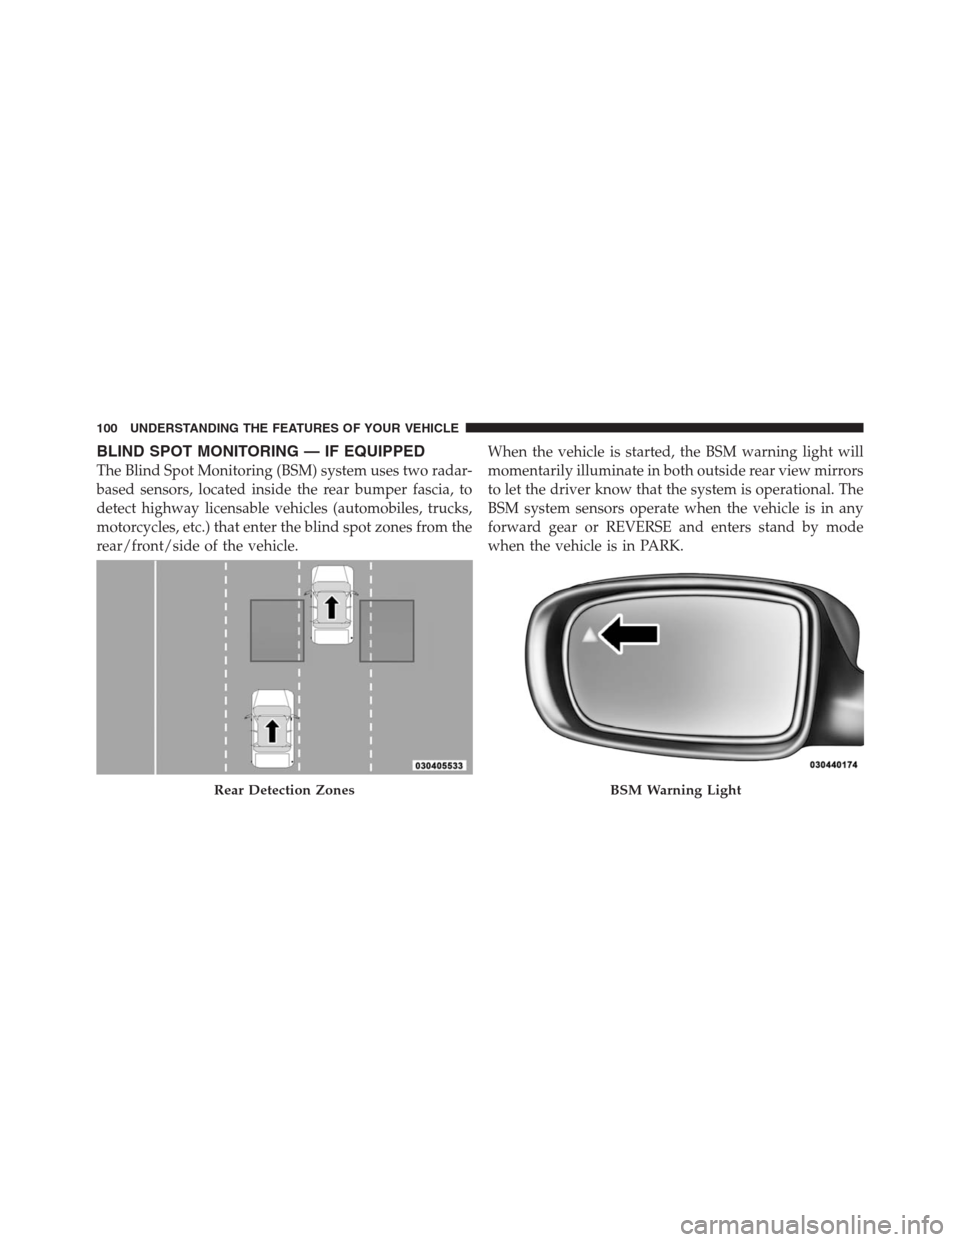 CHRYSLER 300 2012 2.G Owners Manual BLIND SPOT MONITORING — IF EQUIPPED
The Blind Spot Monitoring (BSM) system uses two radar-
based sensors, located inside the rear bumper fascia, to
detect highway licensable vehicles (automobiles, t